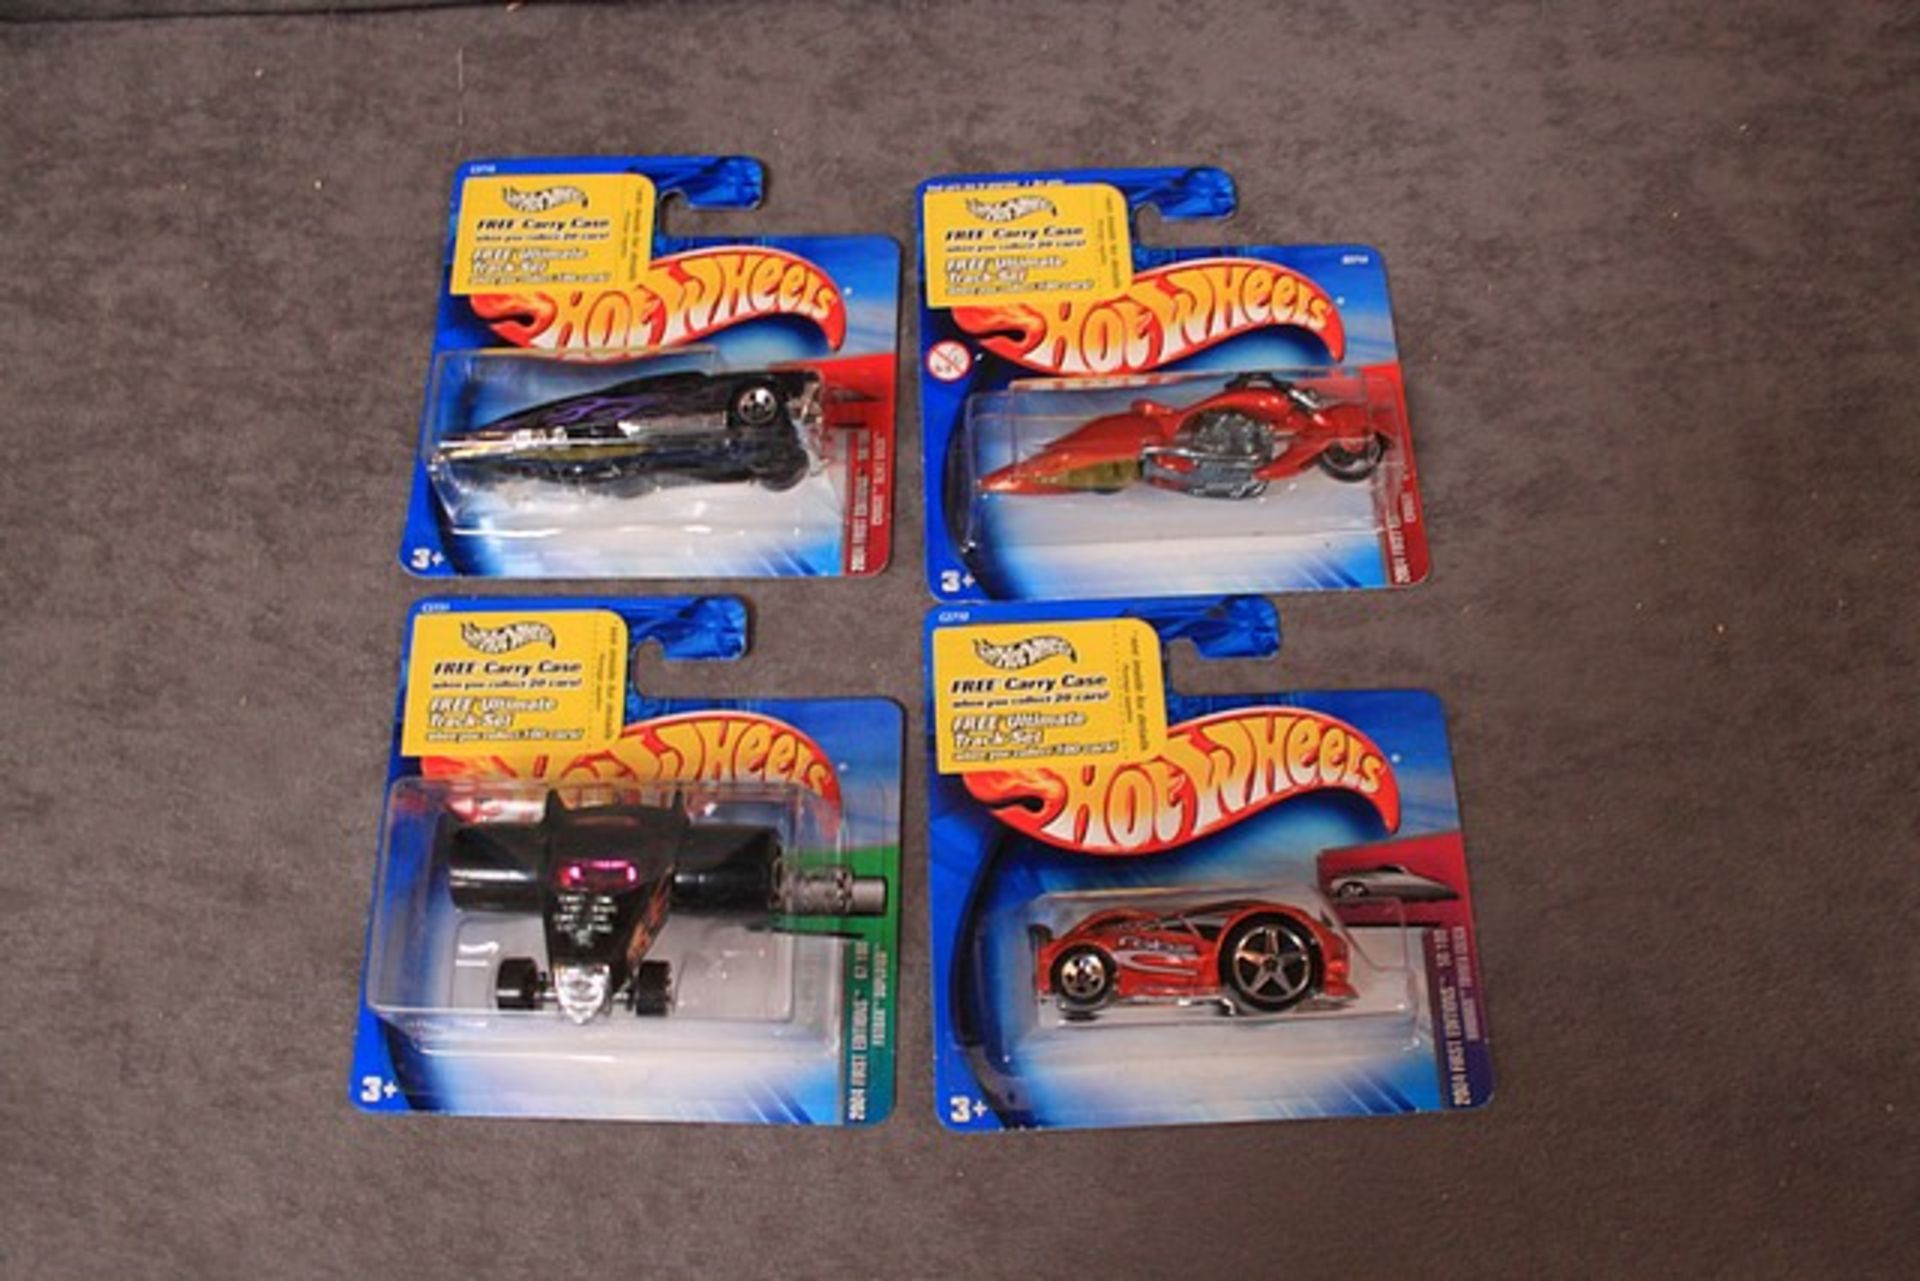 4x Hotwheels 2004 First Editions Comprising Of Numbers #50/100 Crooze Slikt Back, #46/100 Crooze W-